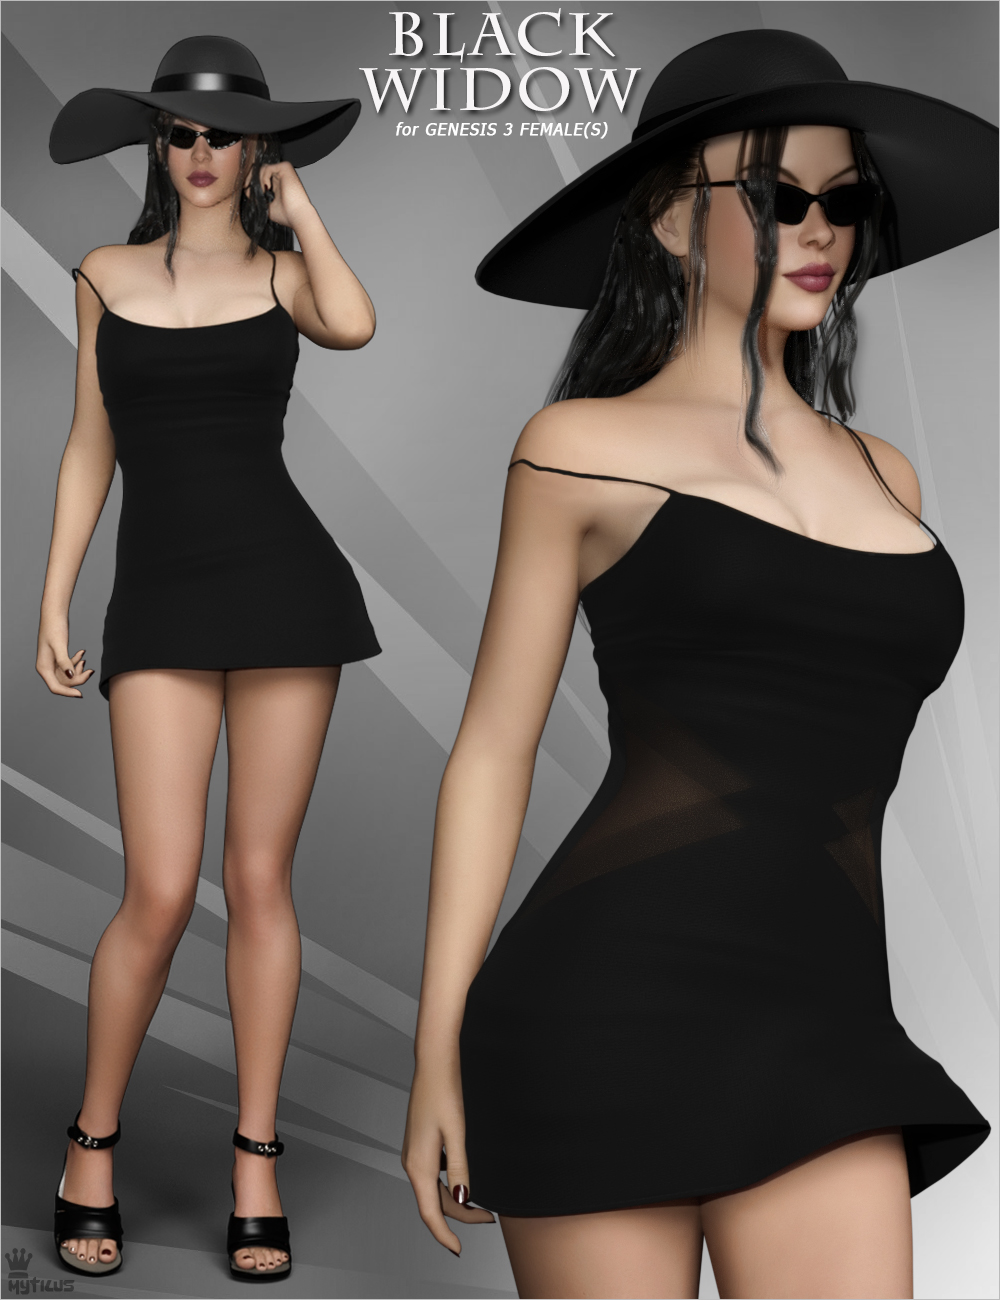 Black Widow Outfit for Genesis 3 Female(s) by: Mytilus, 3D Models by Daz 3D